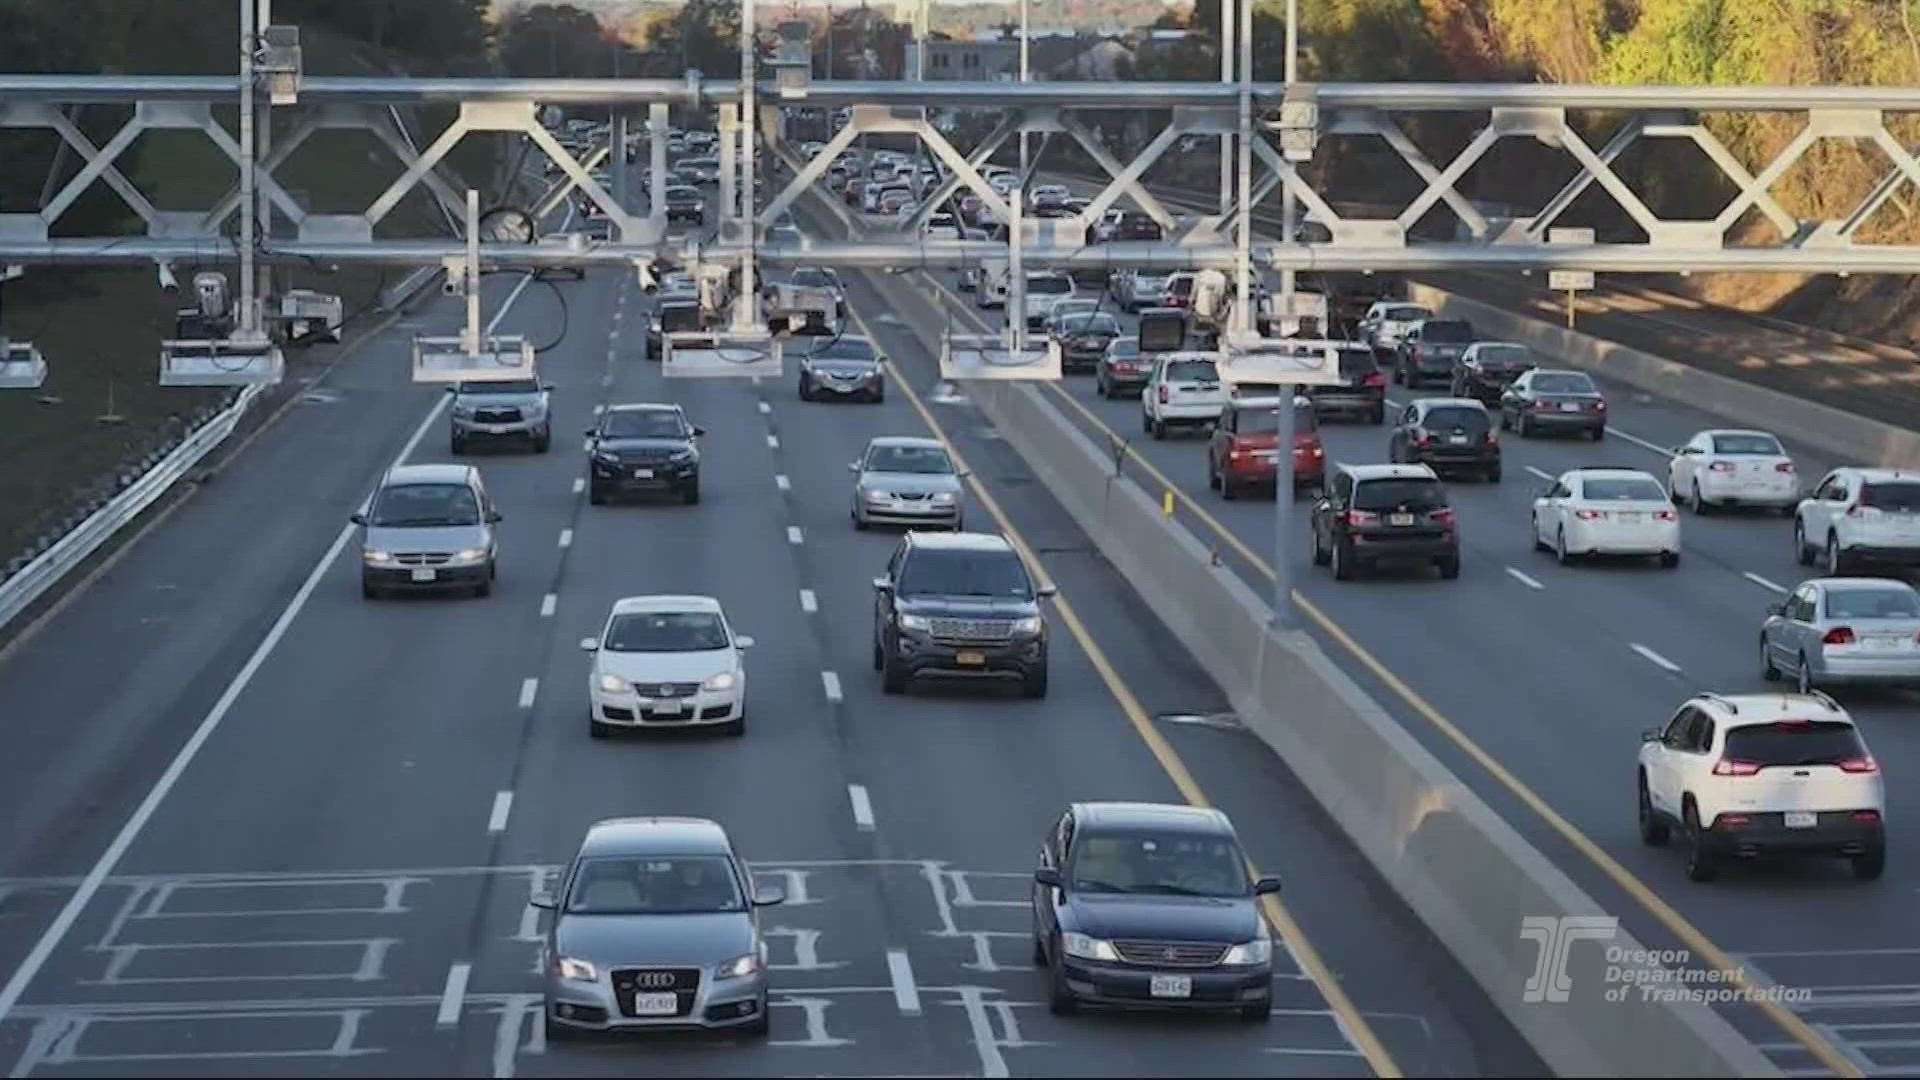 Two freeway tolling locations have already been chosen, but ODOT wants the public to weigh in on the process for identifying more.